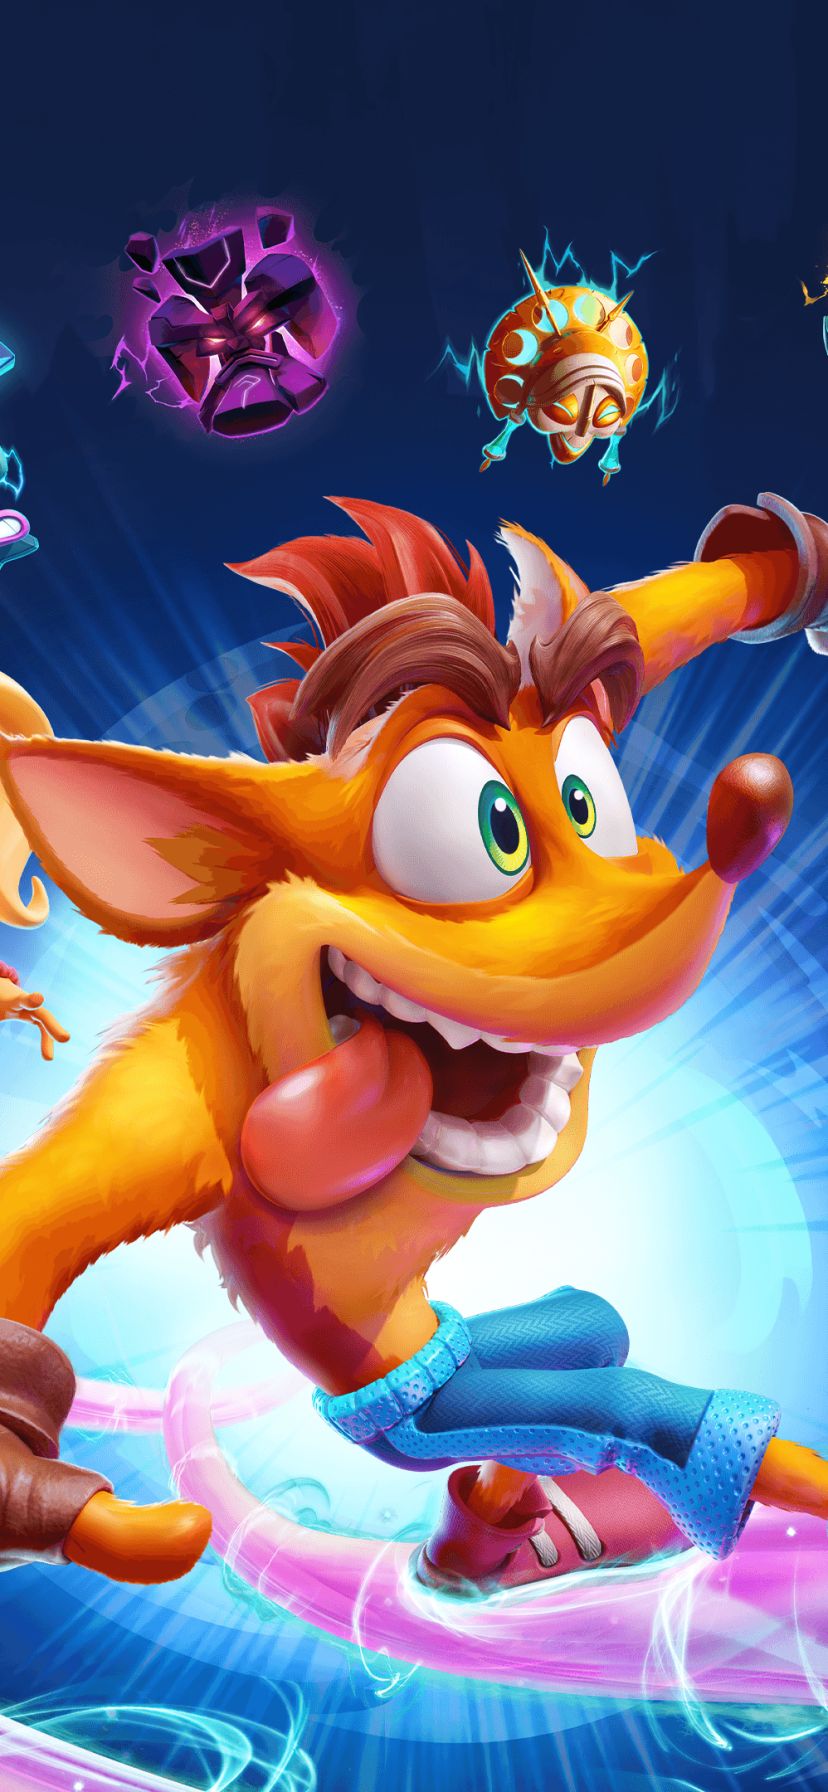 video game, crash bandicoot 4: it's about time, coco bandicoot, crash bandicoot